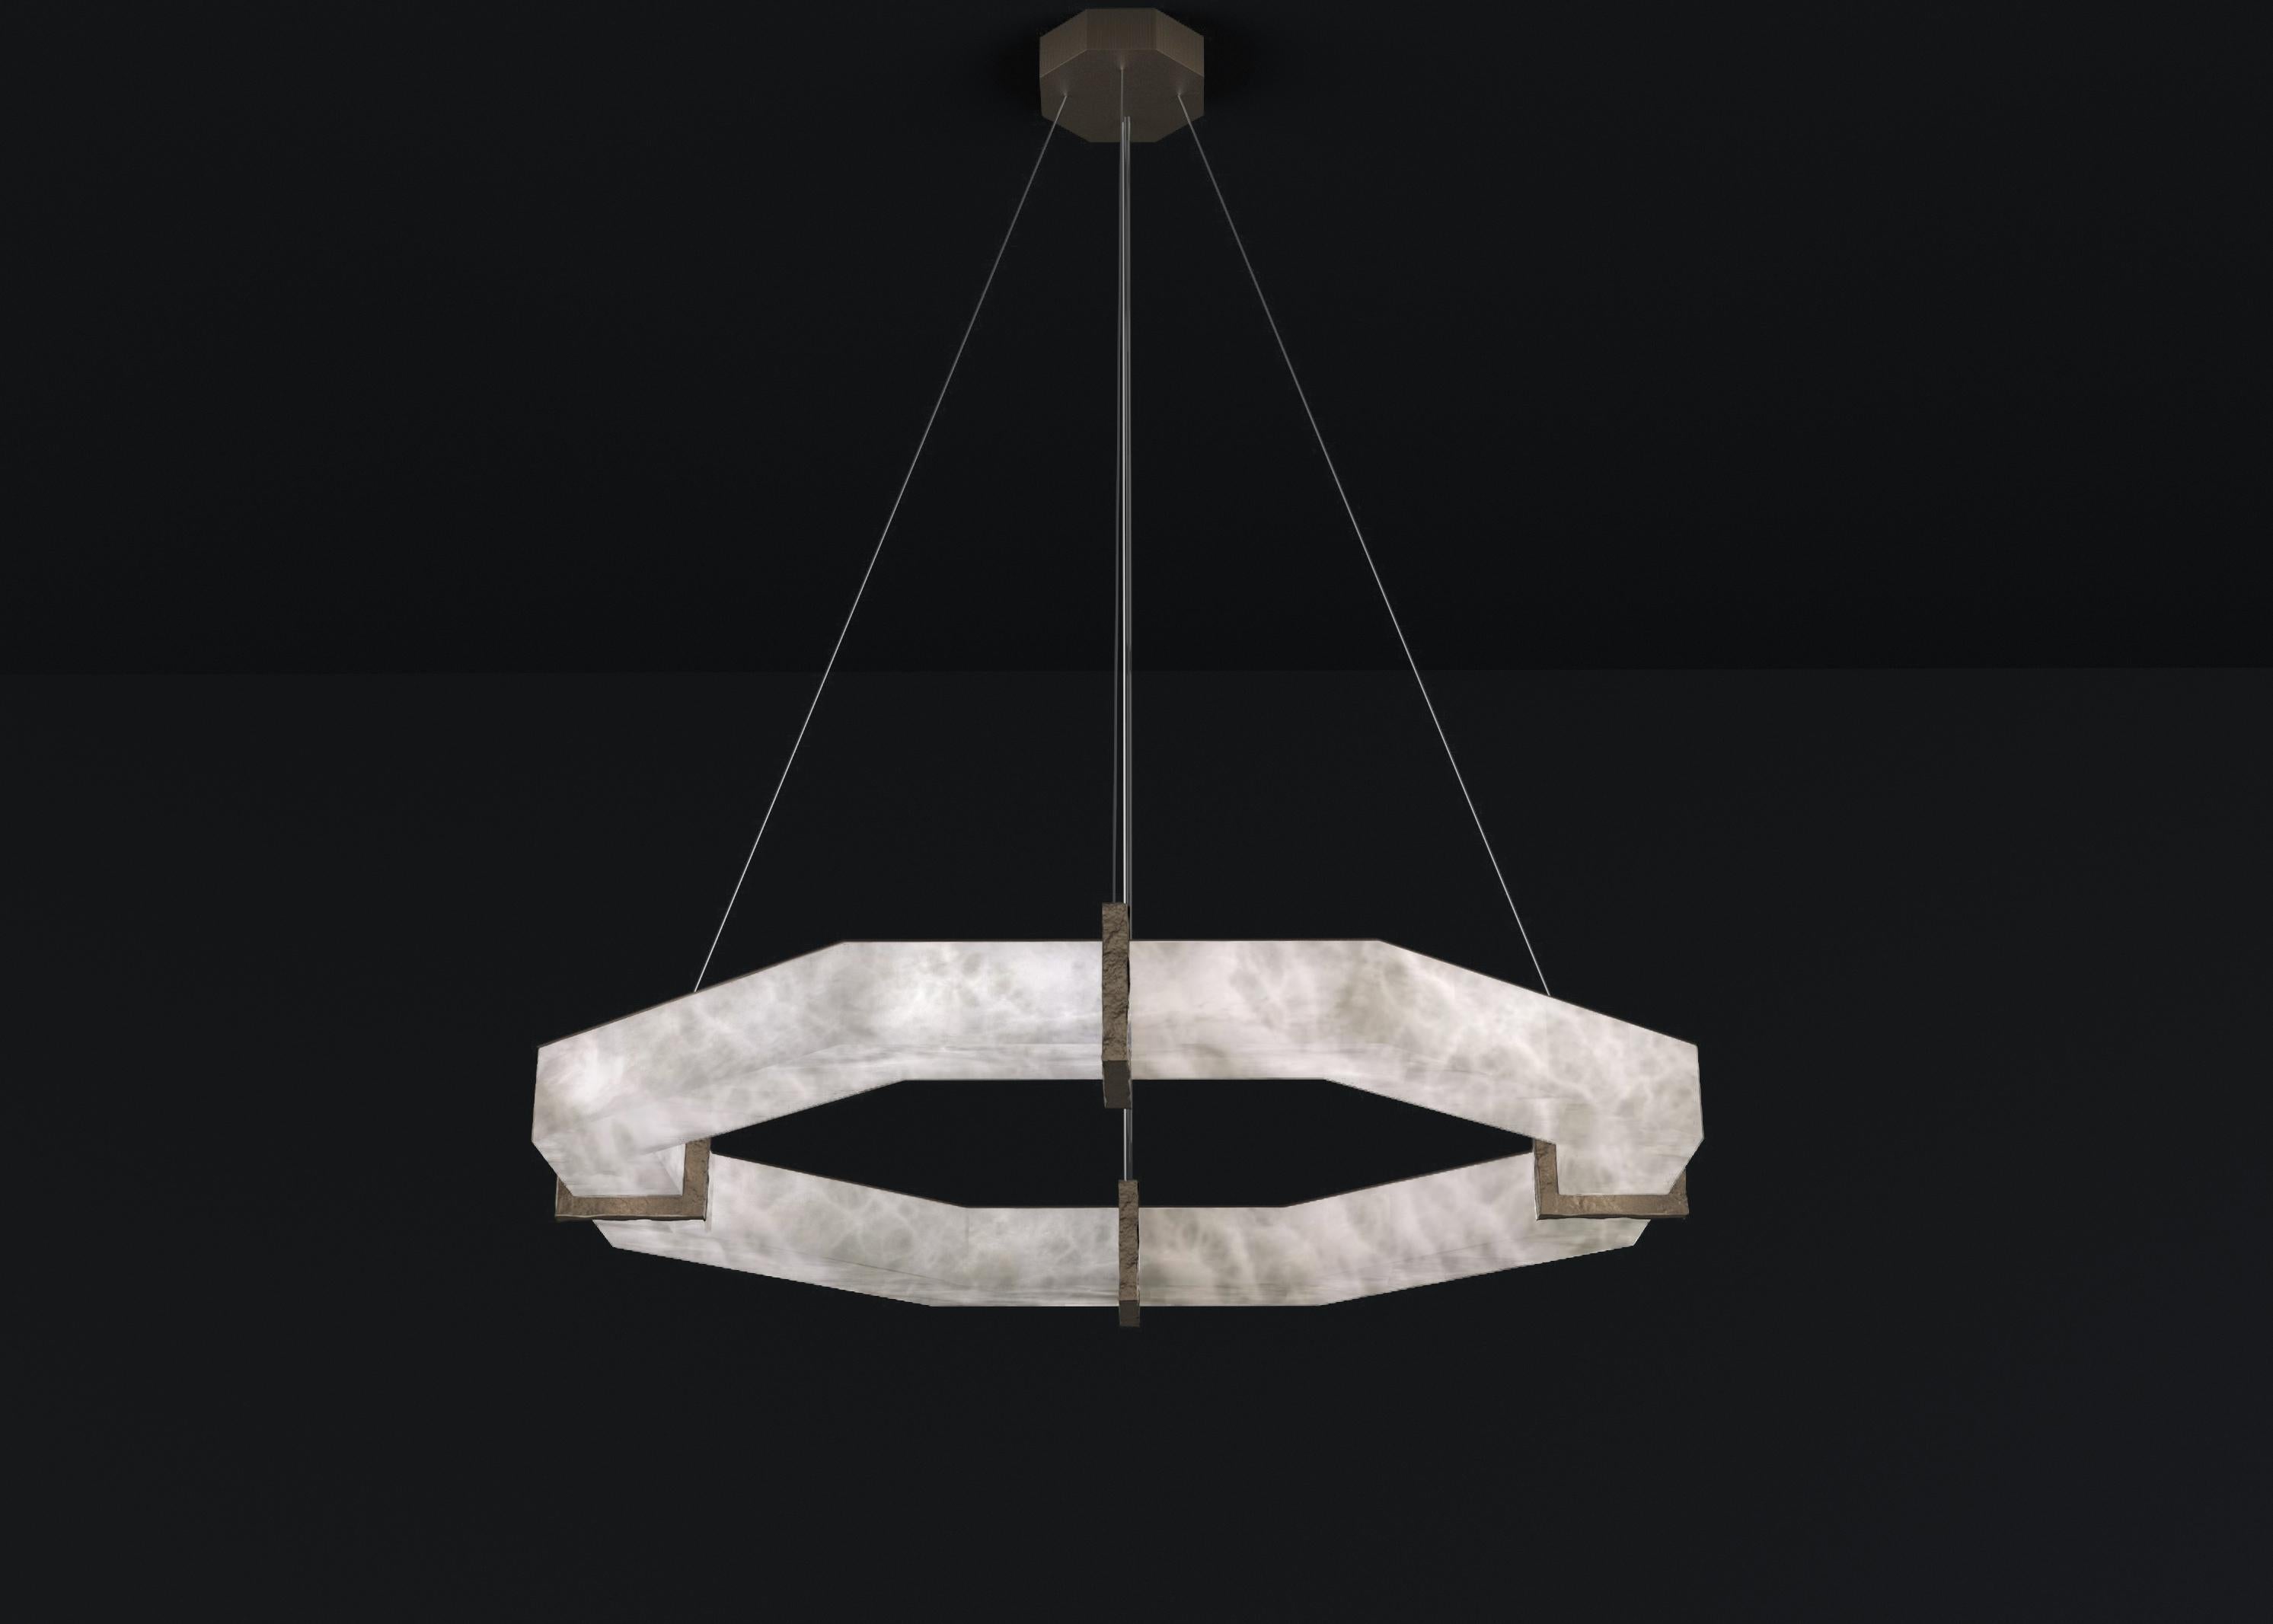 Efesto Brushed Burnished Metal Pendant Lamp by Alabastro Italiano
Dimensions: D 83 x W 80 x H 11 cm.
Materials: White alabaster and metal.

Available in different finishes: Shiny Silver, Bronze, Brushed Brass, Ruggine of Florence, Brushed Burnished,